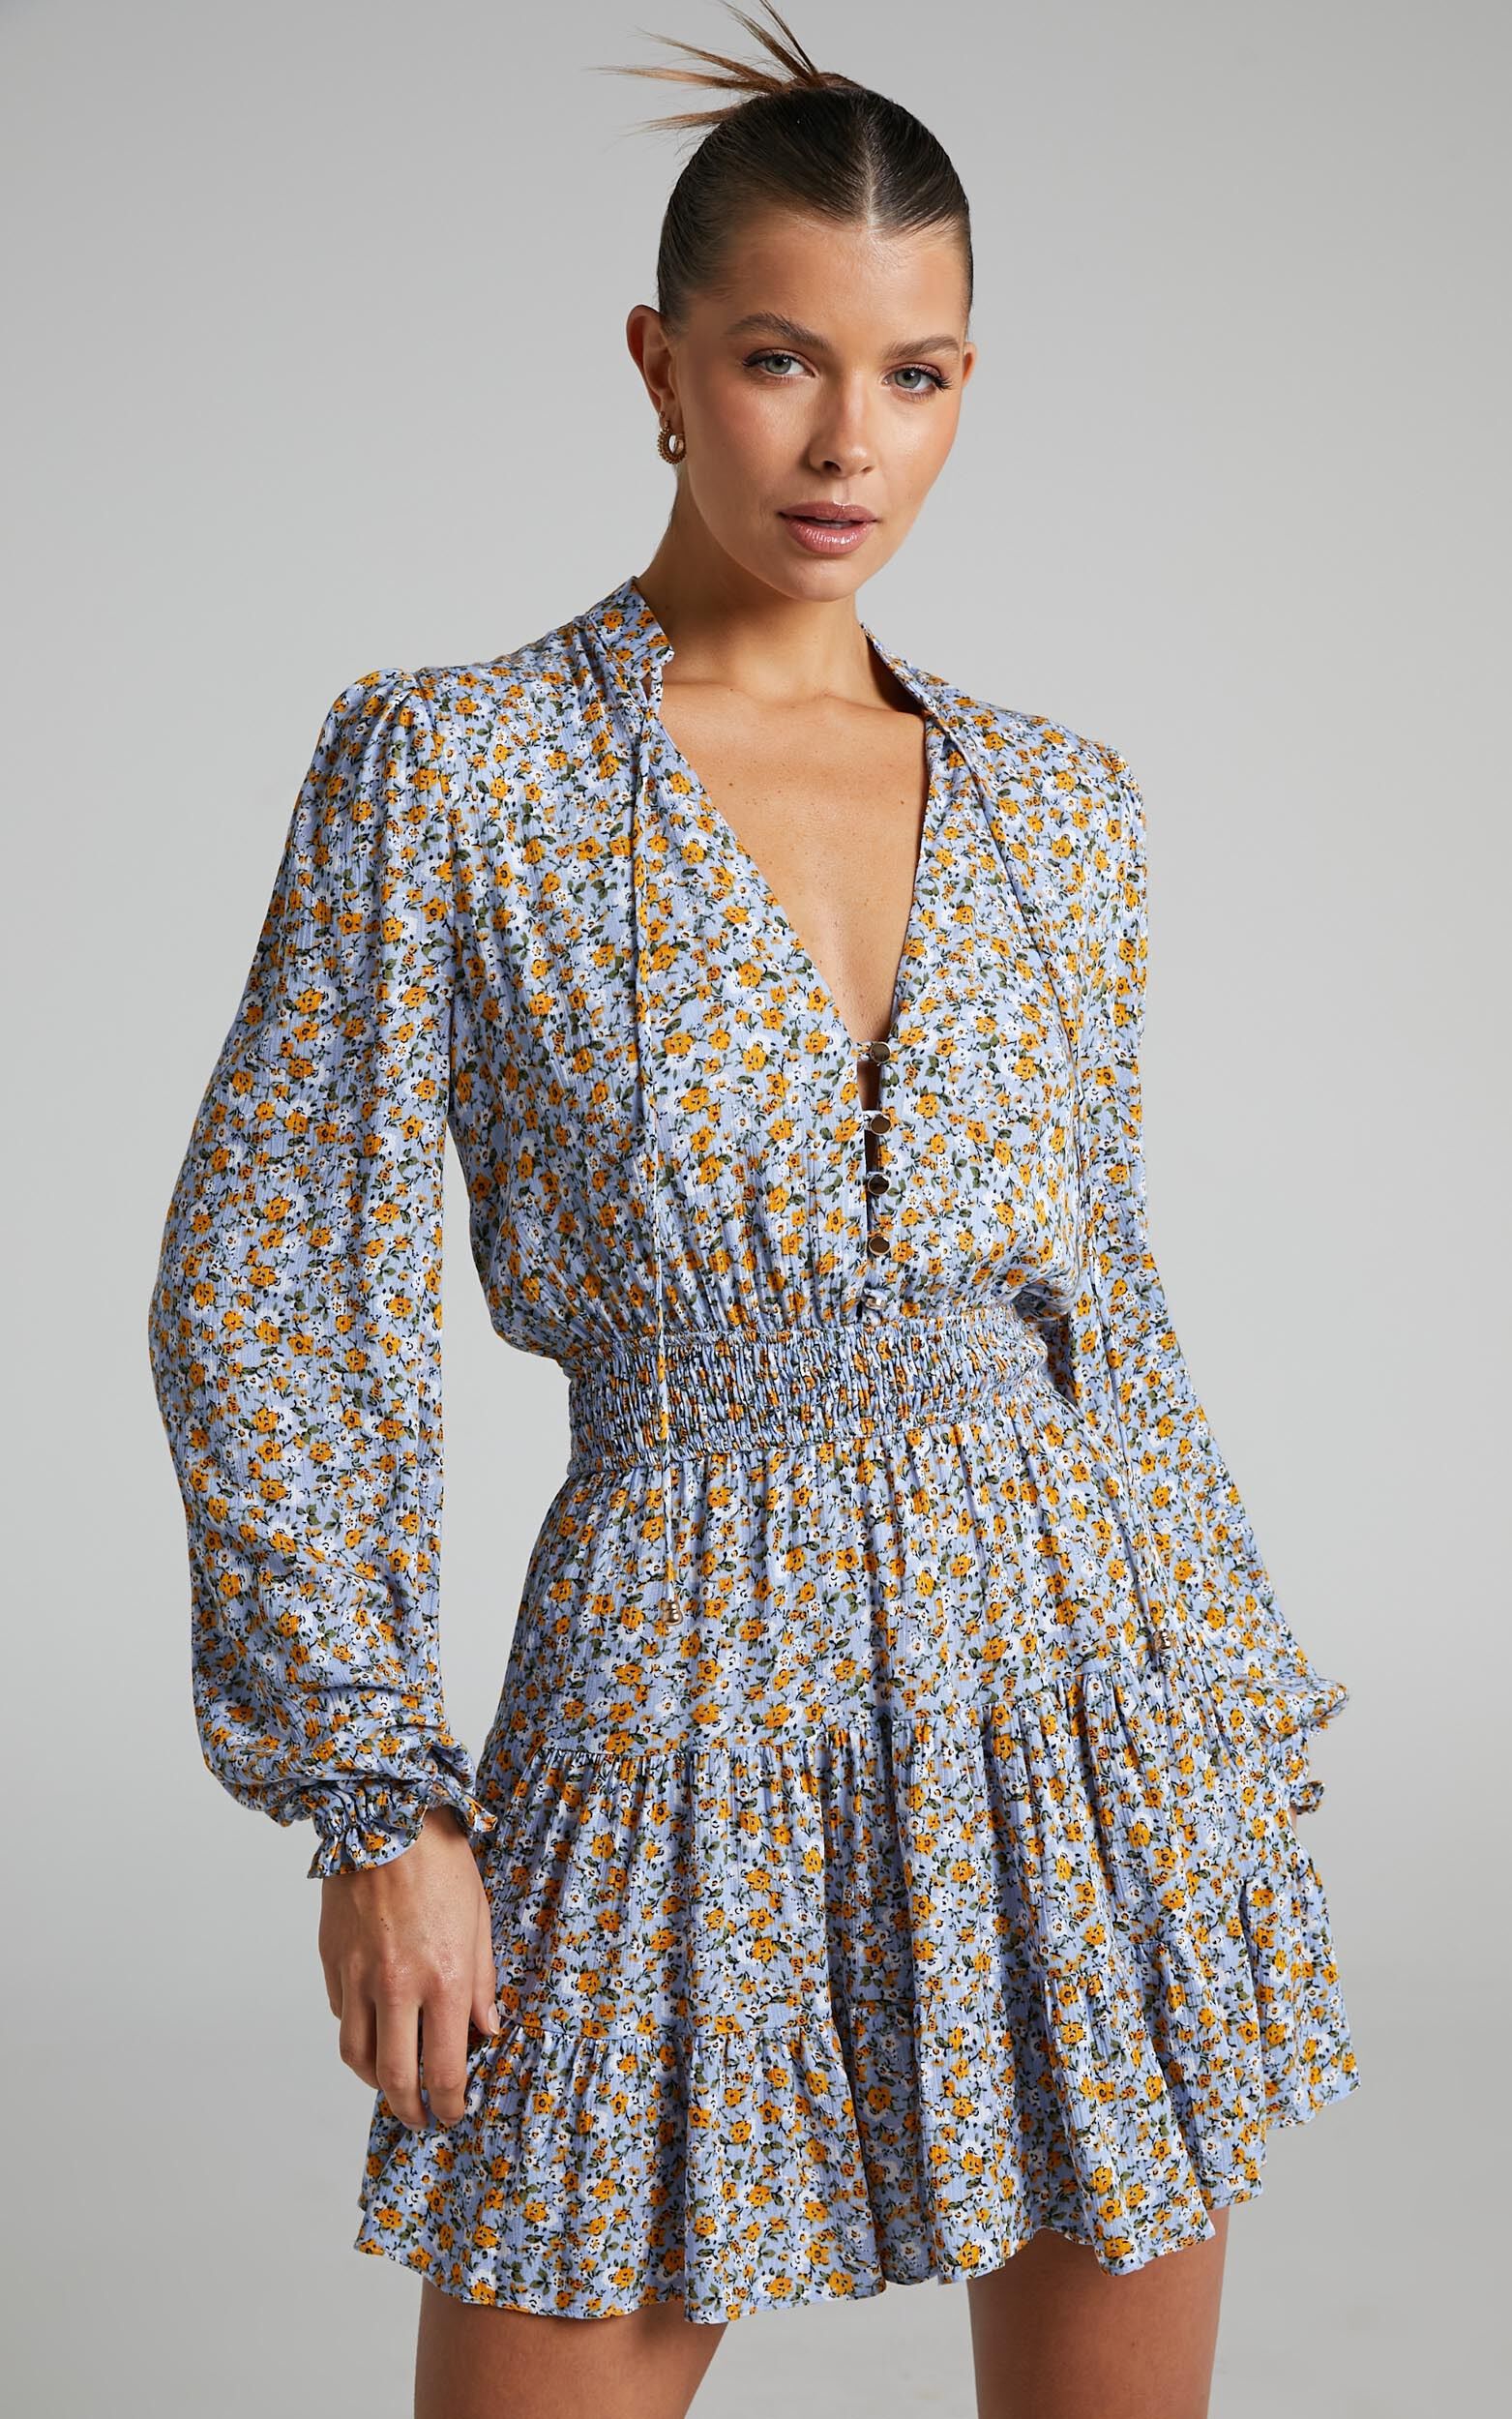 Luisella Long Sleeve Shirred Waist Mini Dress in Blue Ditsy Floral - 04, BLU1, super-hi-res image number null